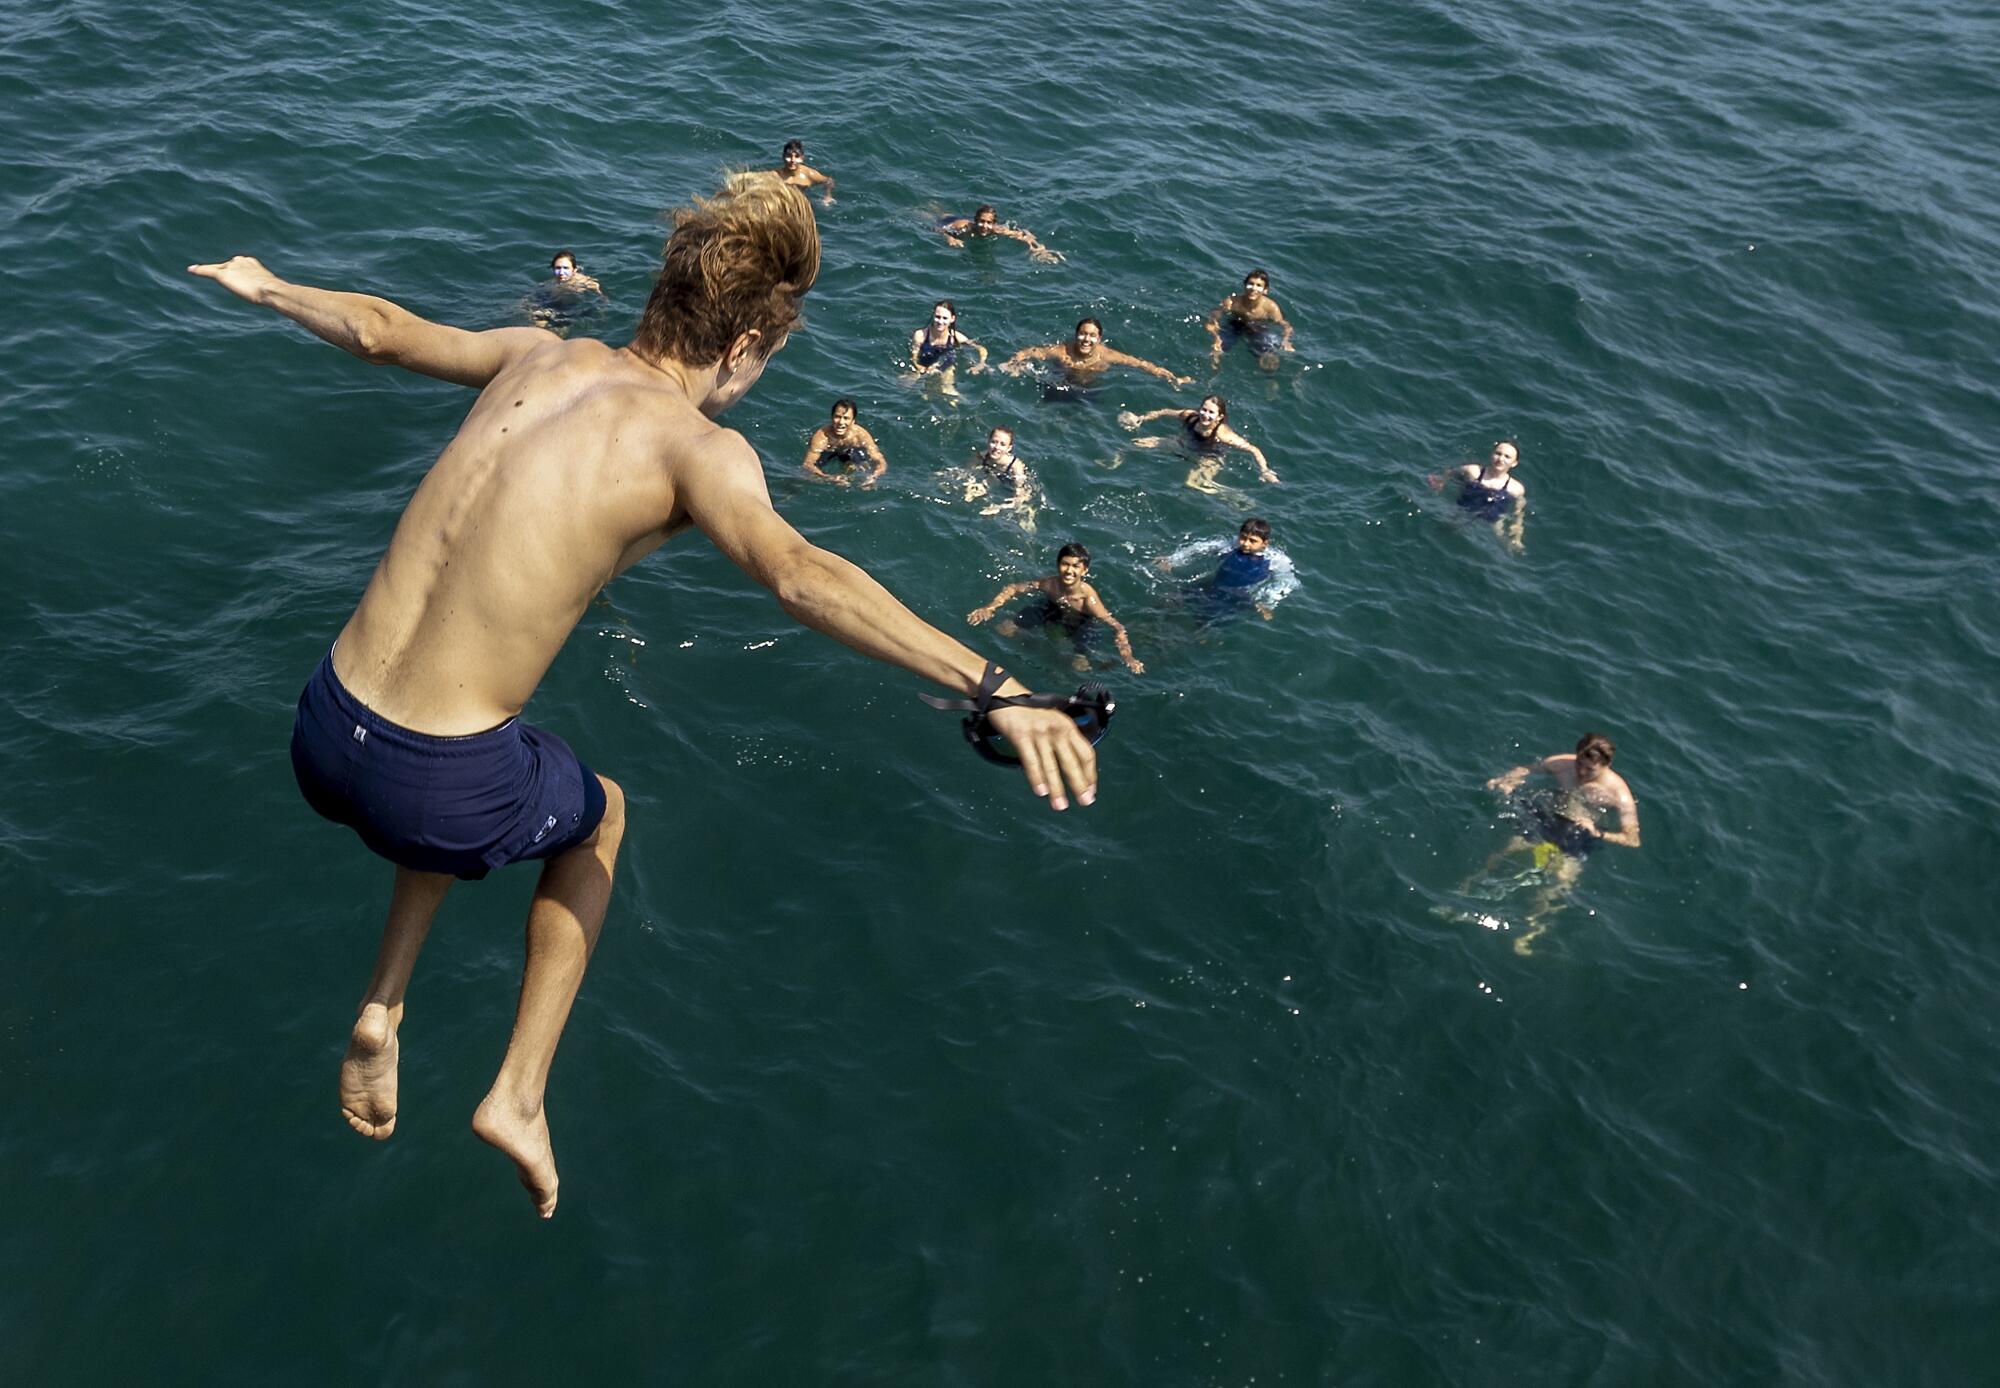 A teenager jumps into the ocean where a group of people tread water